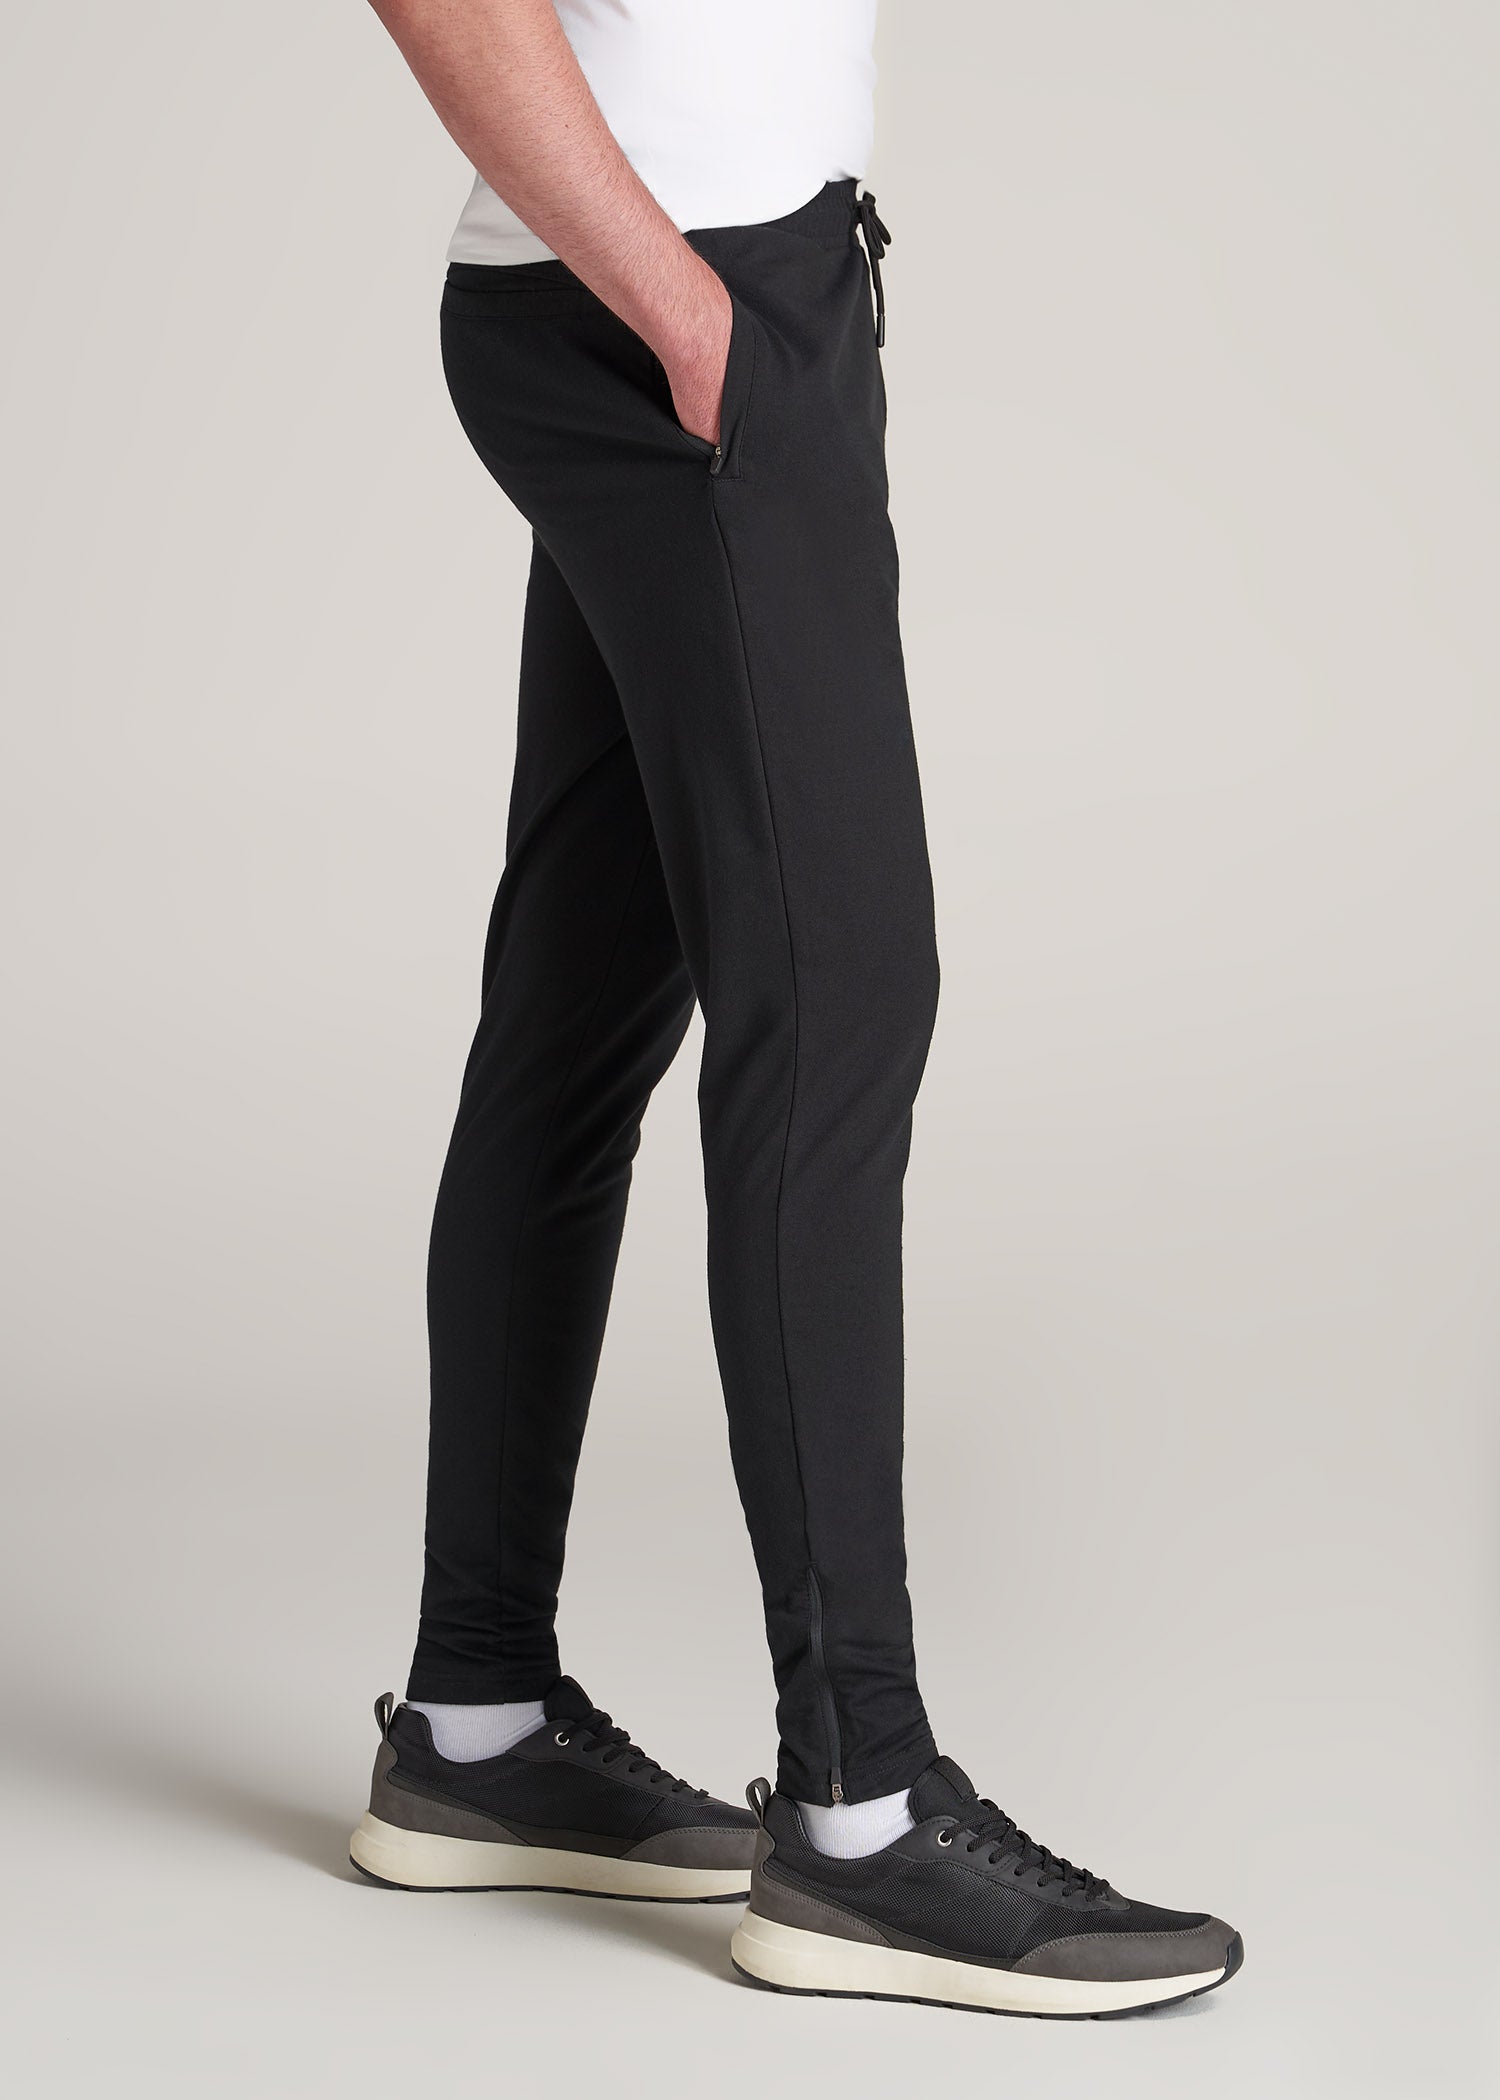 American-Tall-Men-Light-Weight-Tapered-French-Terry-Jogger-Black-side